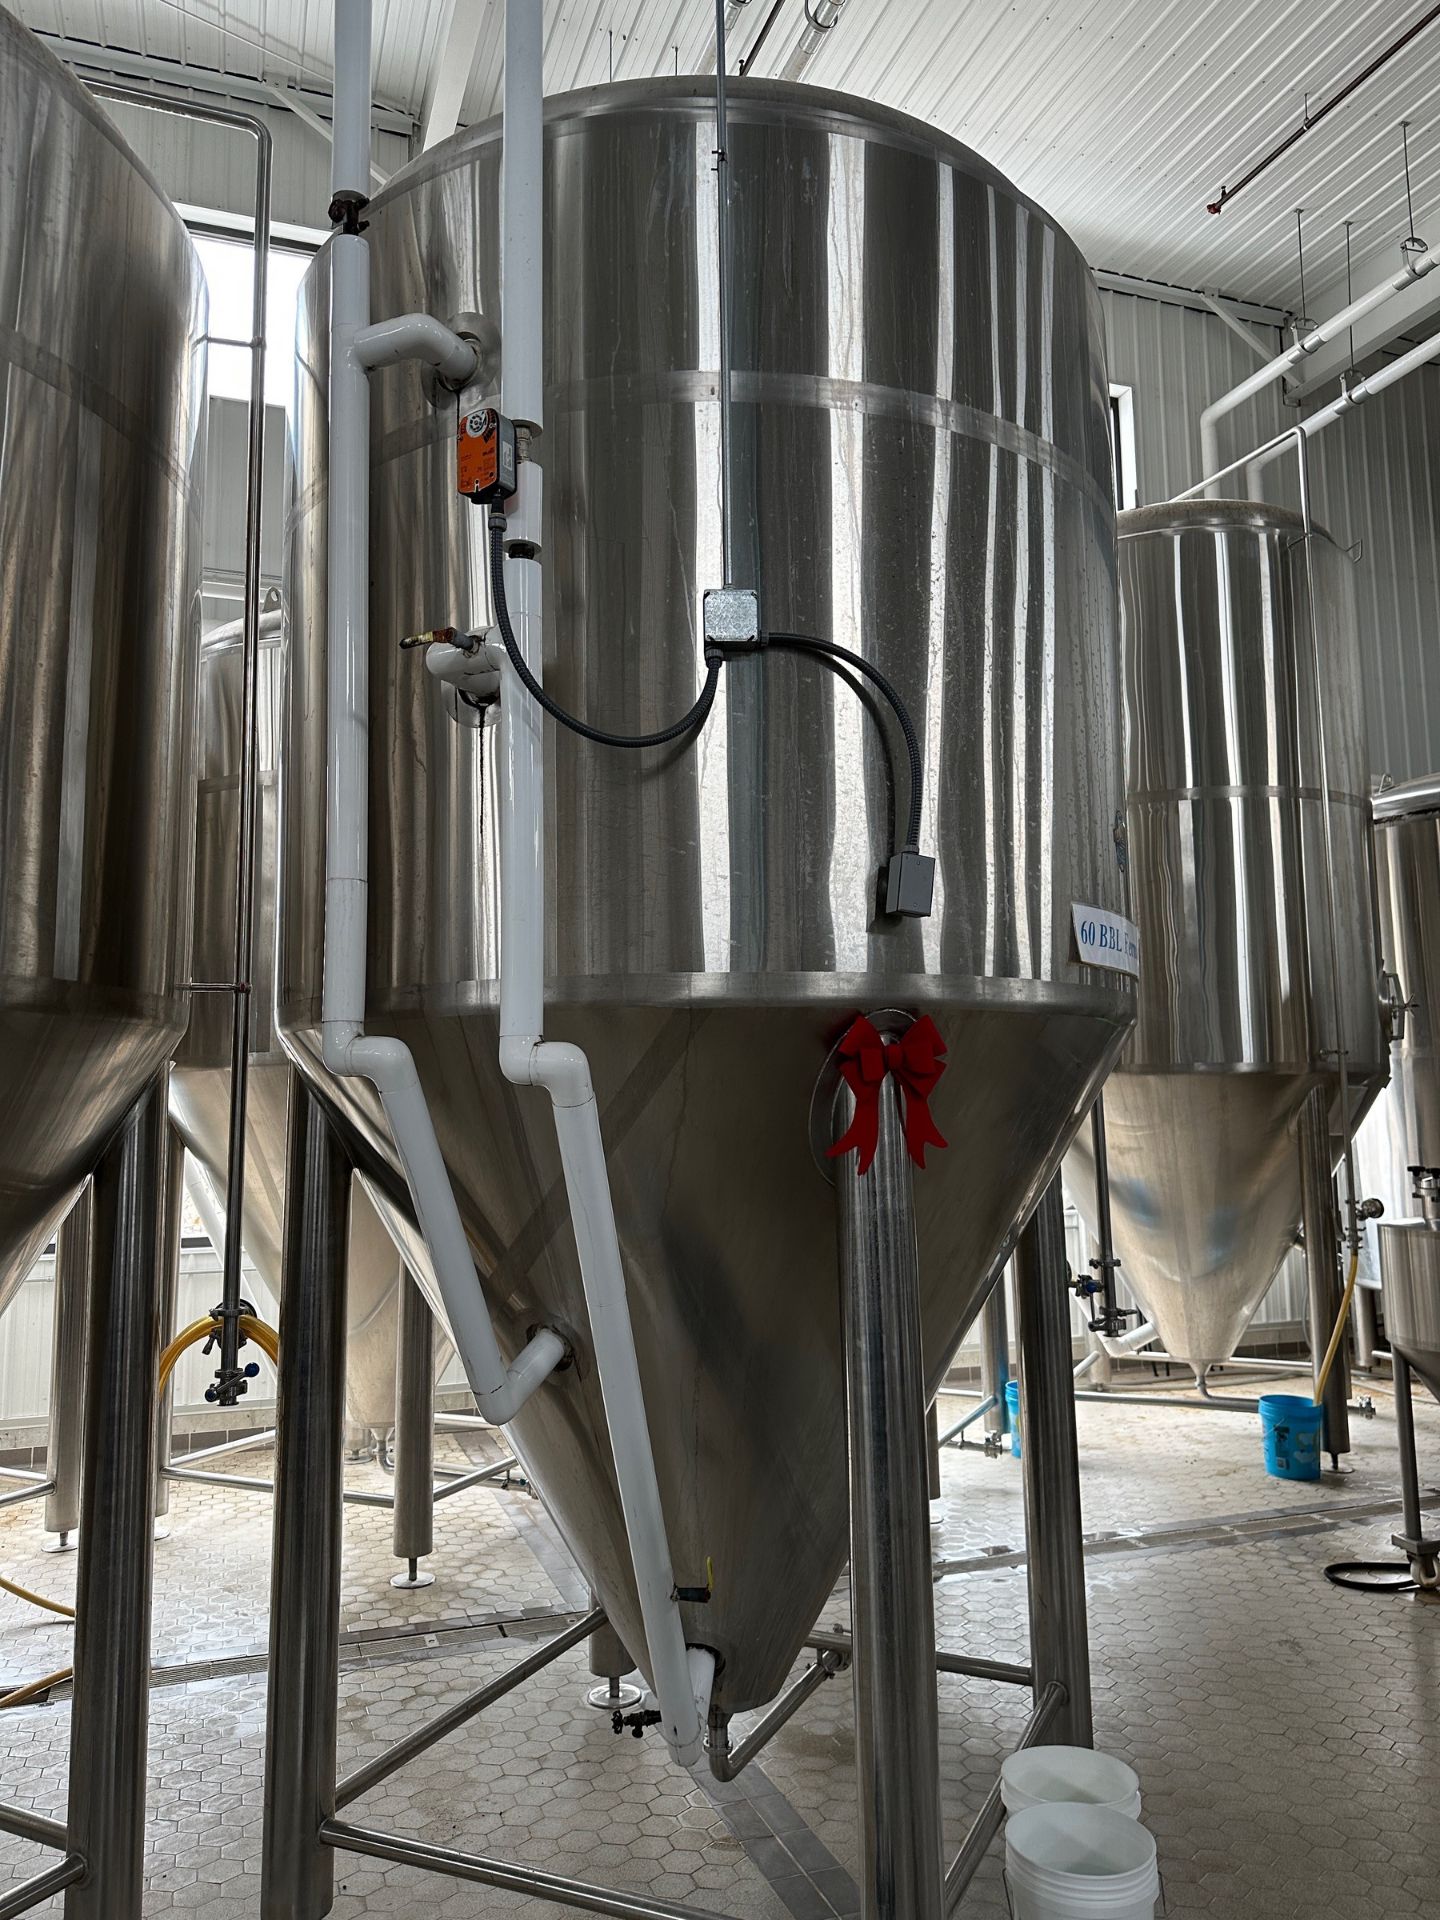 DME 60 BBL Stainless Steel Fermentation Tank - Cone Bottom, Glycol Jacketed, Mandoor, Zwickel Valve, - Image 2 of 3